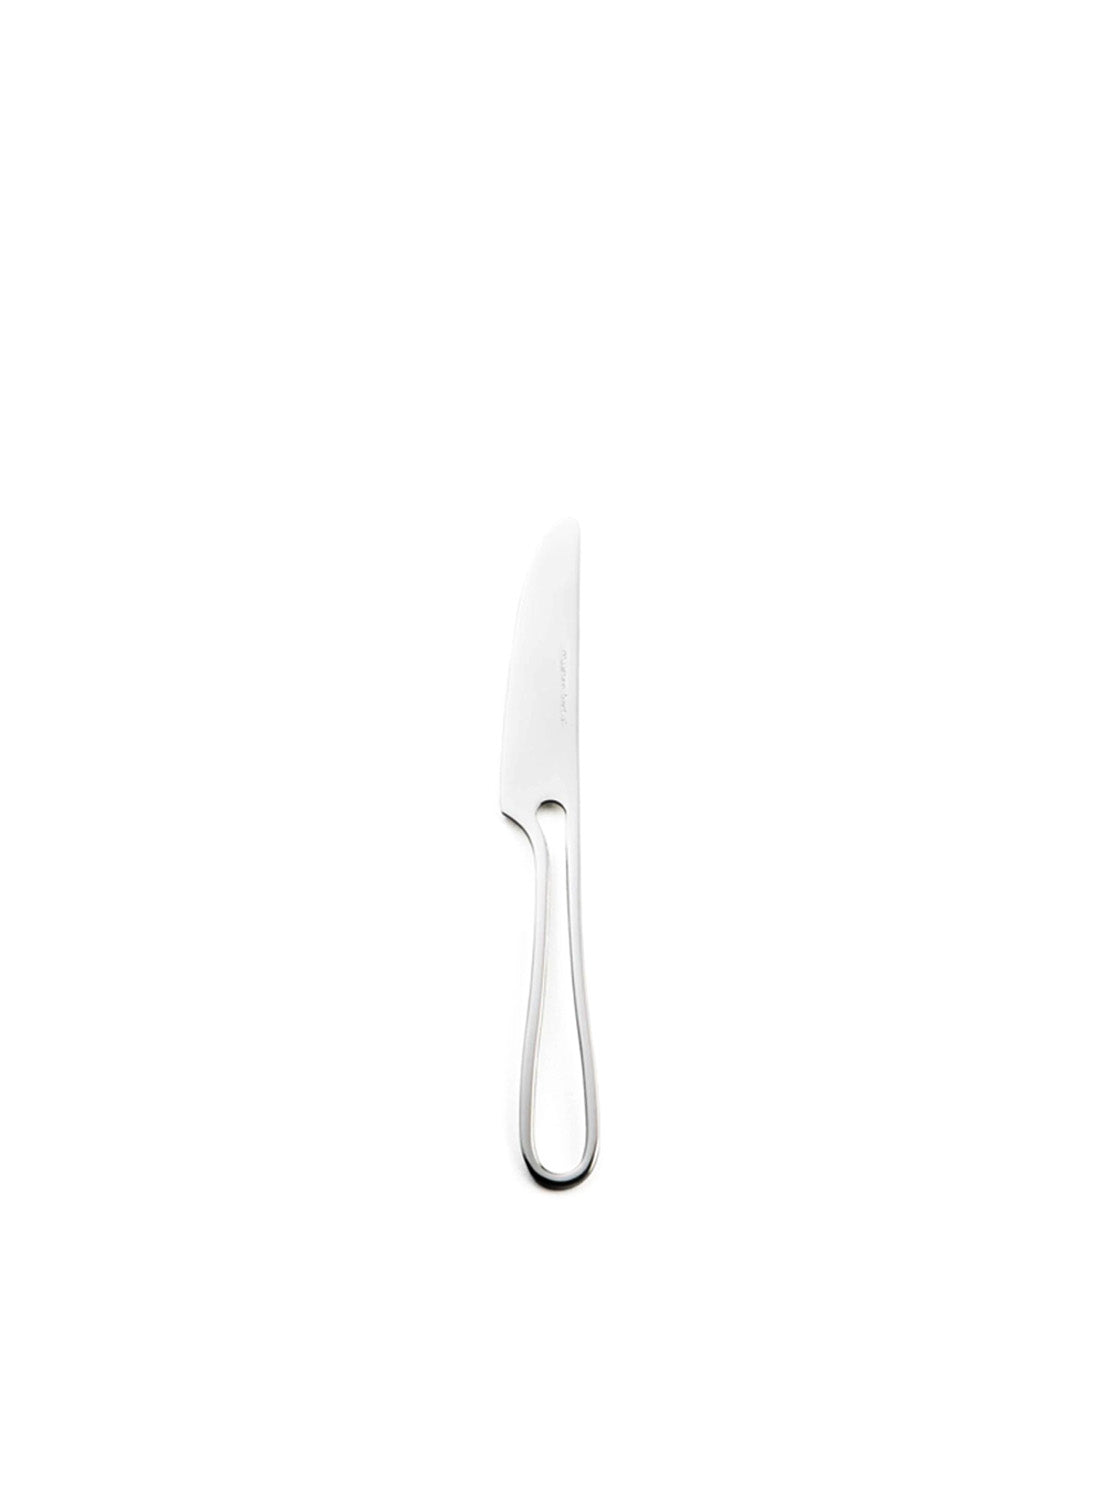 Maarten Baptist Outline Small Knife - Polished Stainless Steel